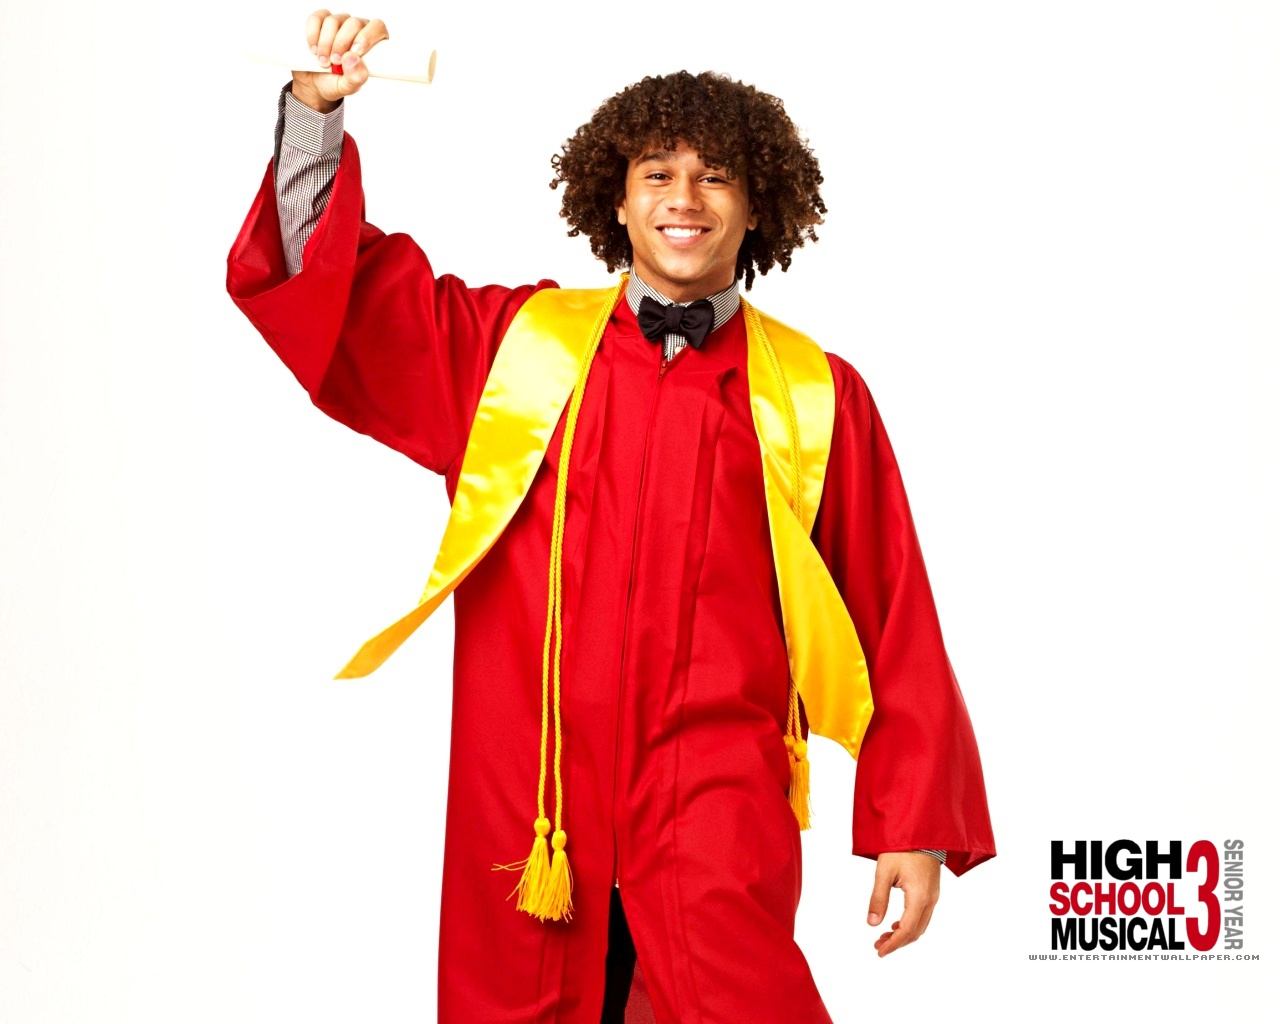 Free wallpaper HD: High School Musical 3 Pictures